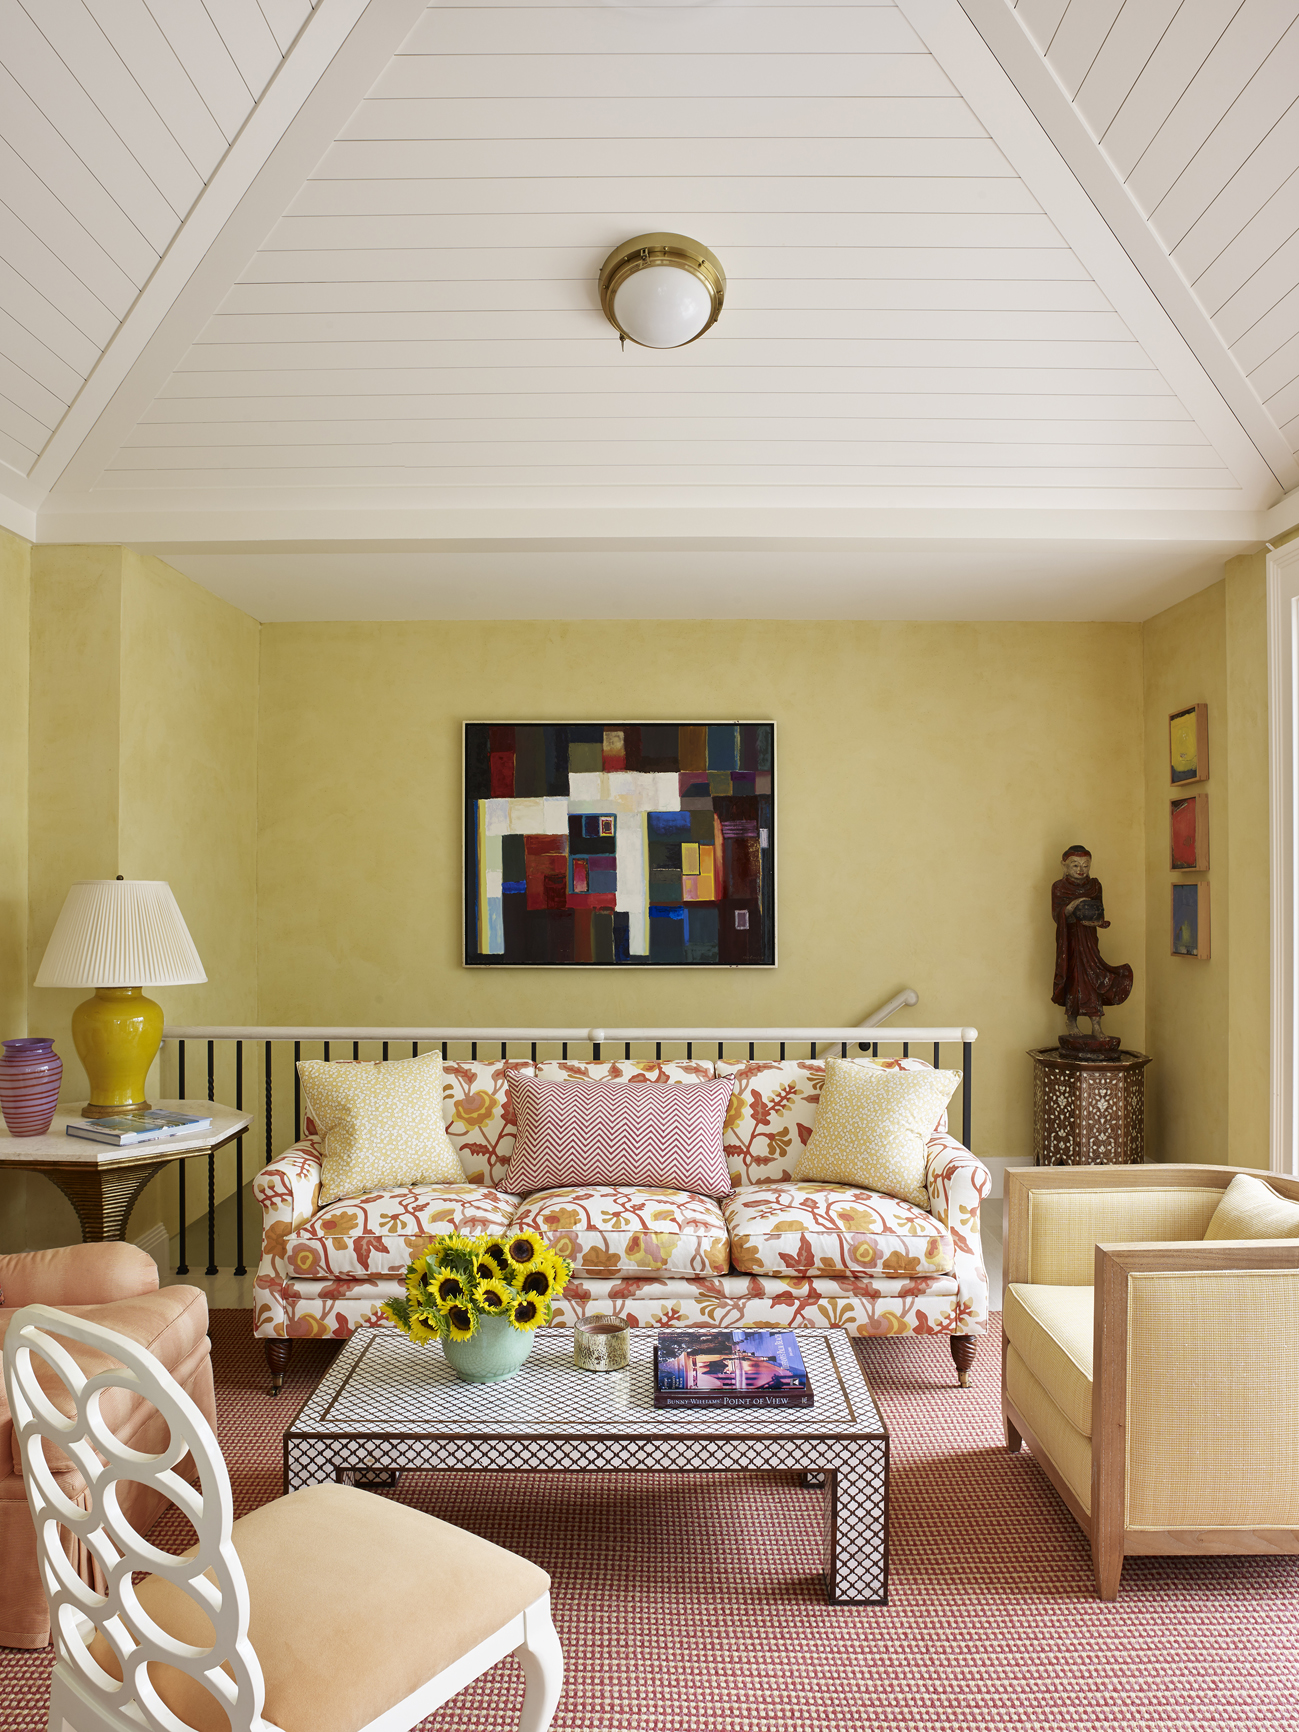 Bunny Williams' 6 Tips For Decorating With Antiques